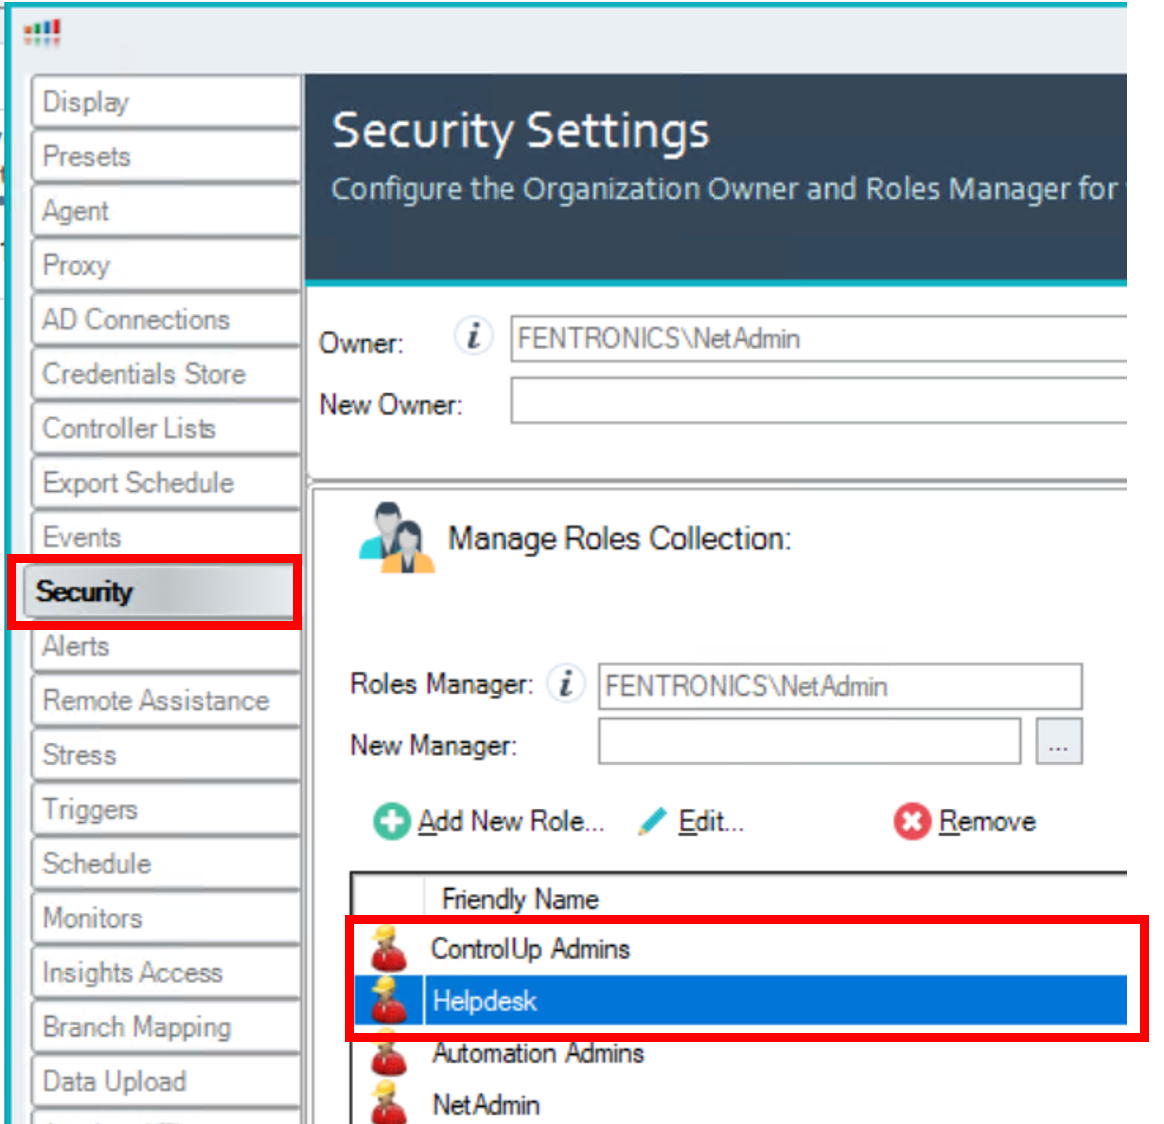 We enhanced our built-in role-based access control (RBAC) scheme with two more built-in, editable security roles Helpdesk, and ControlUp Admins